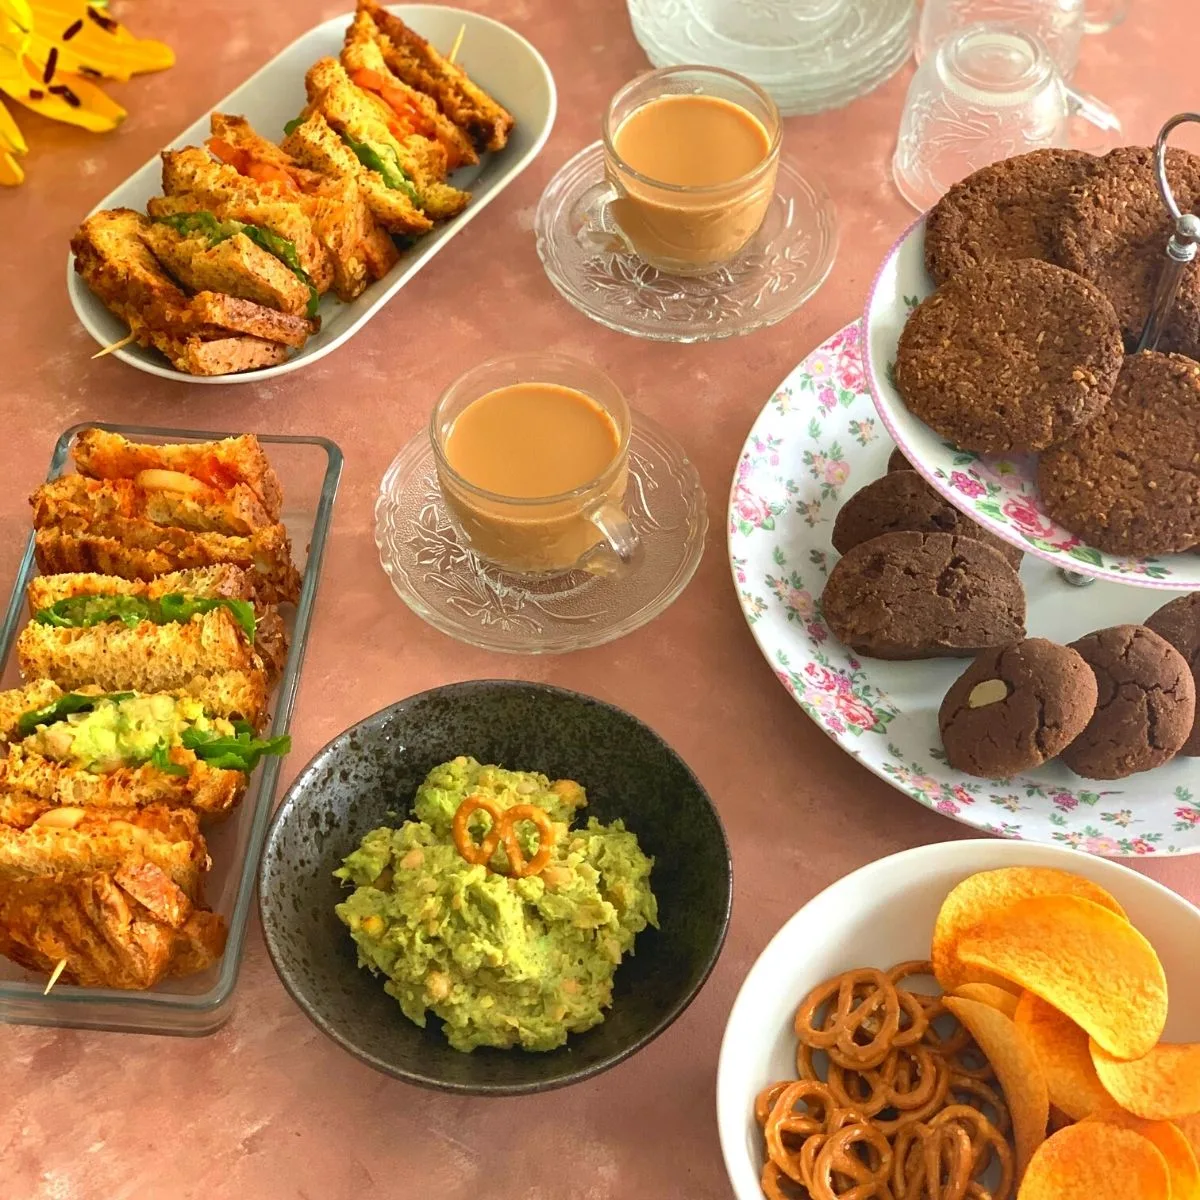 Afternoon Tea Time Platter featuring different types of Vegan Sandwiches, Gluten-Free and nut-free cookies, chips, and dips catering to people with different food groups.